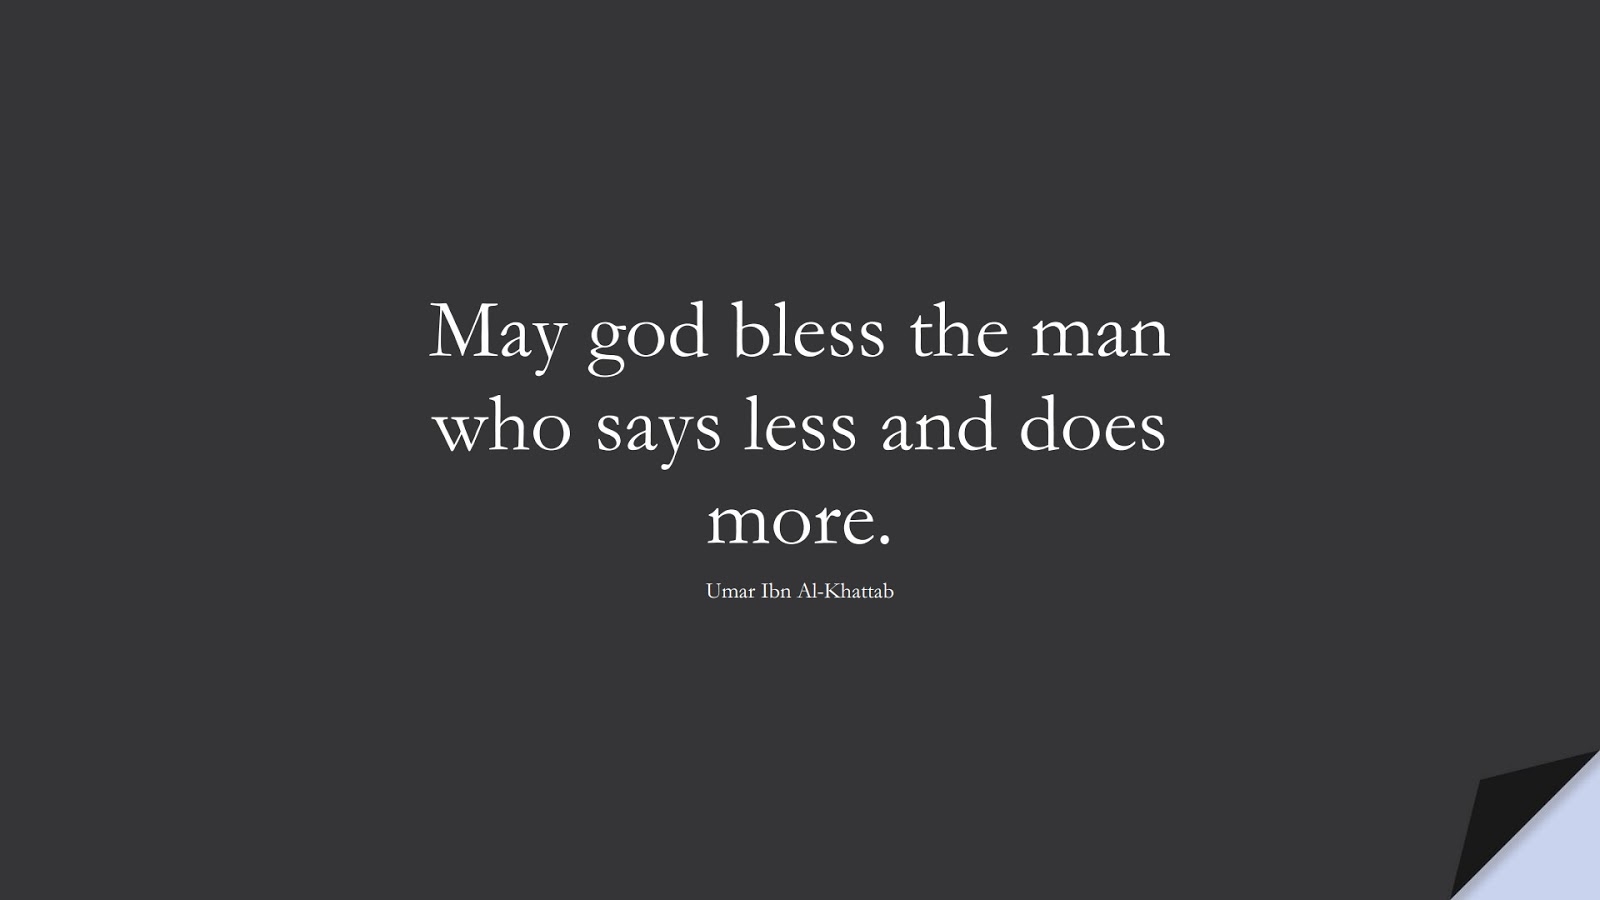 May god bless the man who says less and does more. (Umar Ibn Al-Khattab);  #UmarQuotes